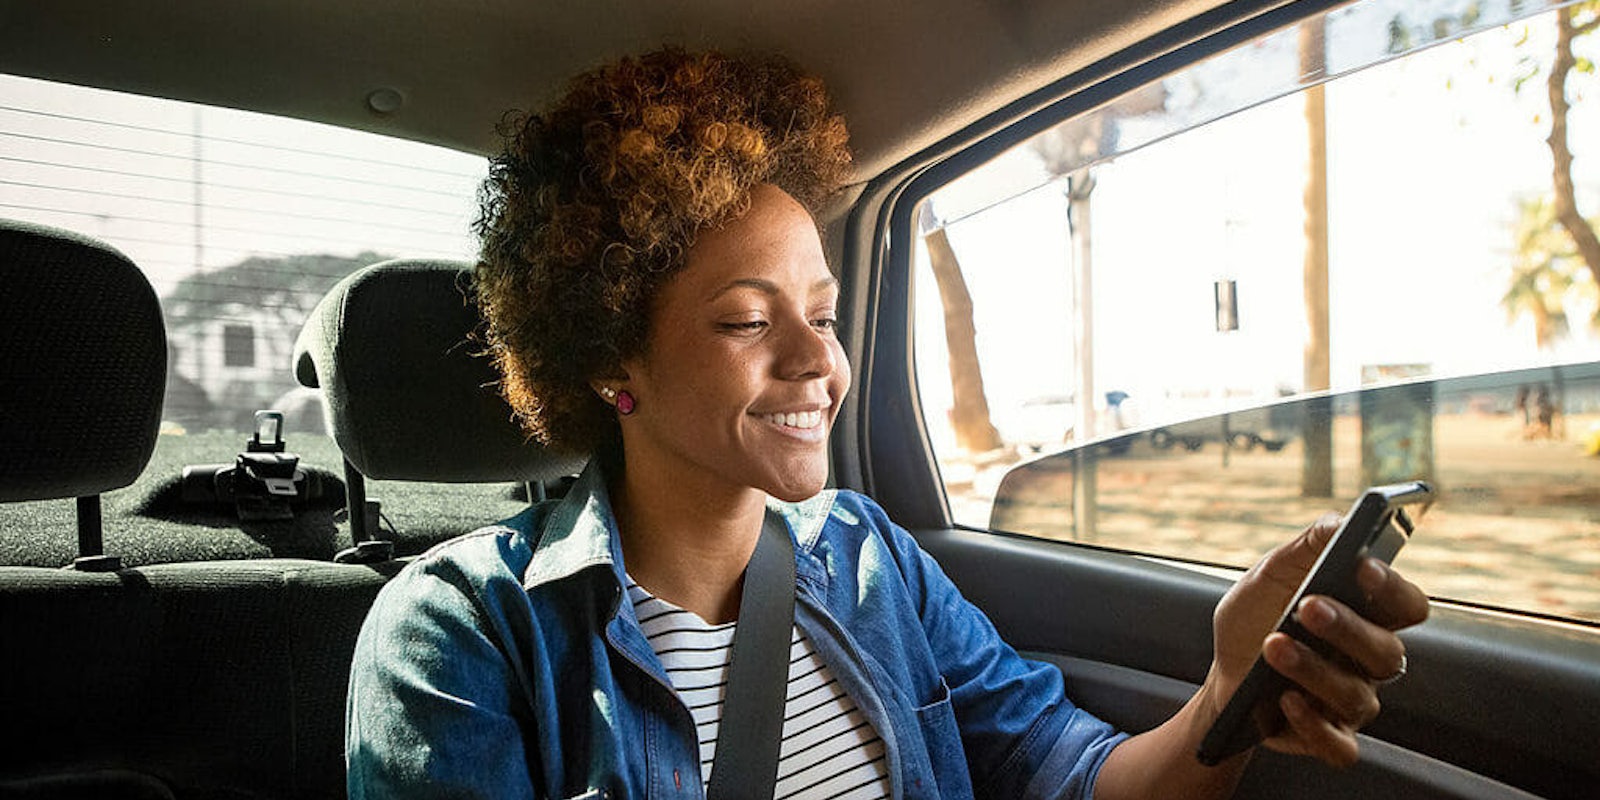 Woman in Uber smiling